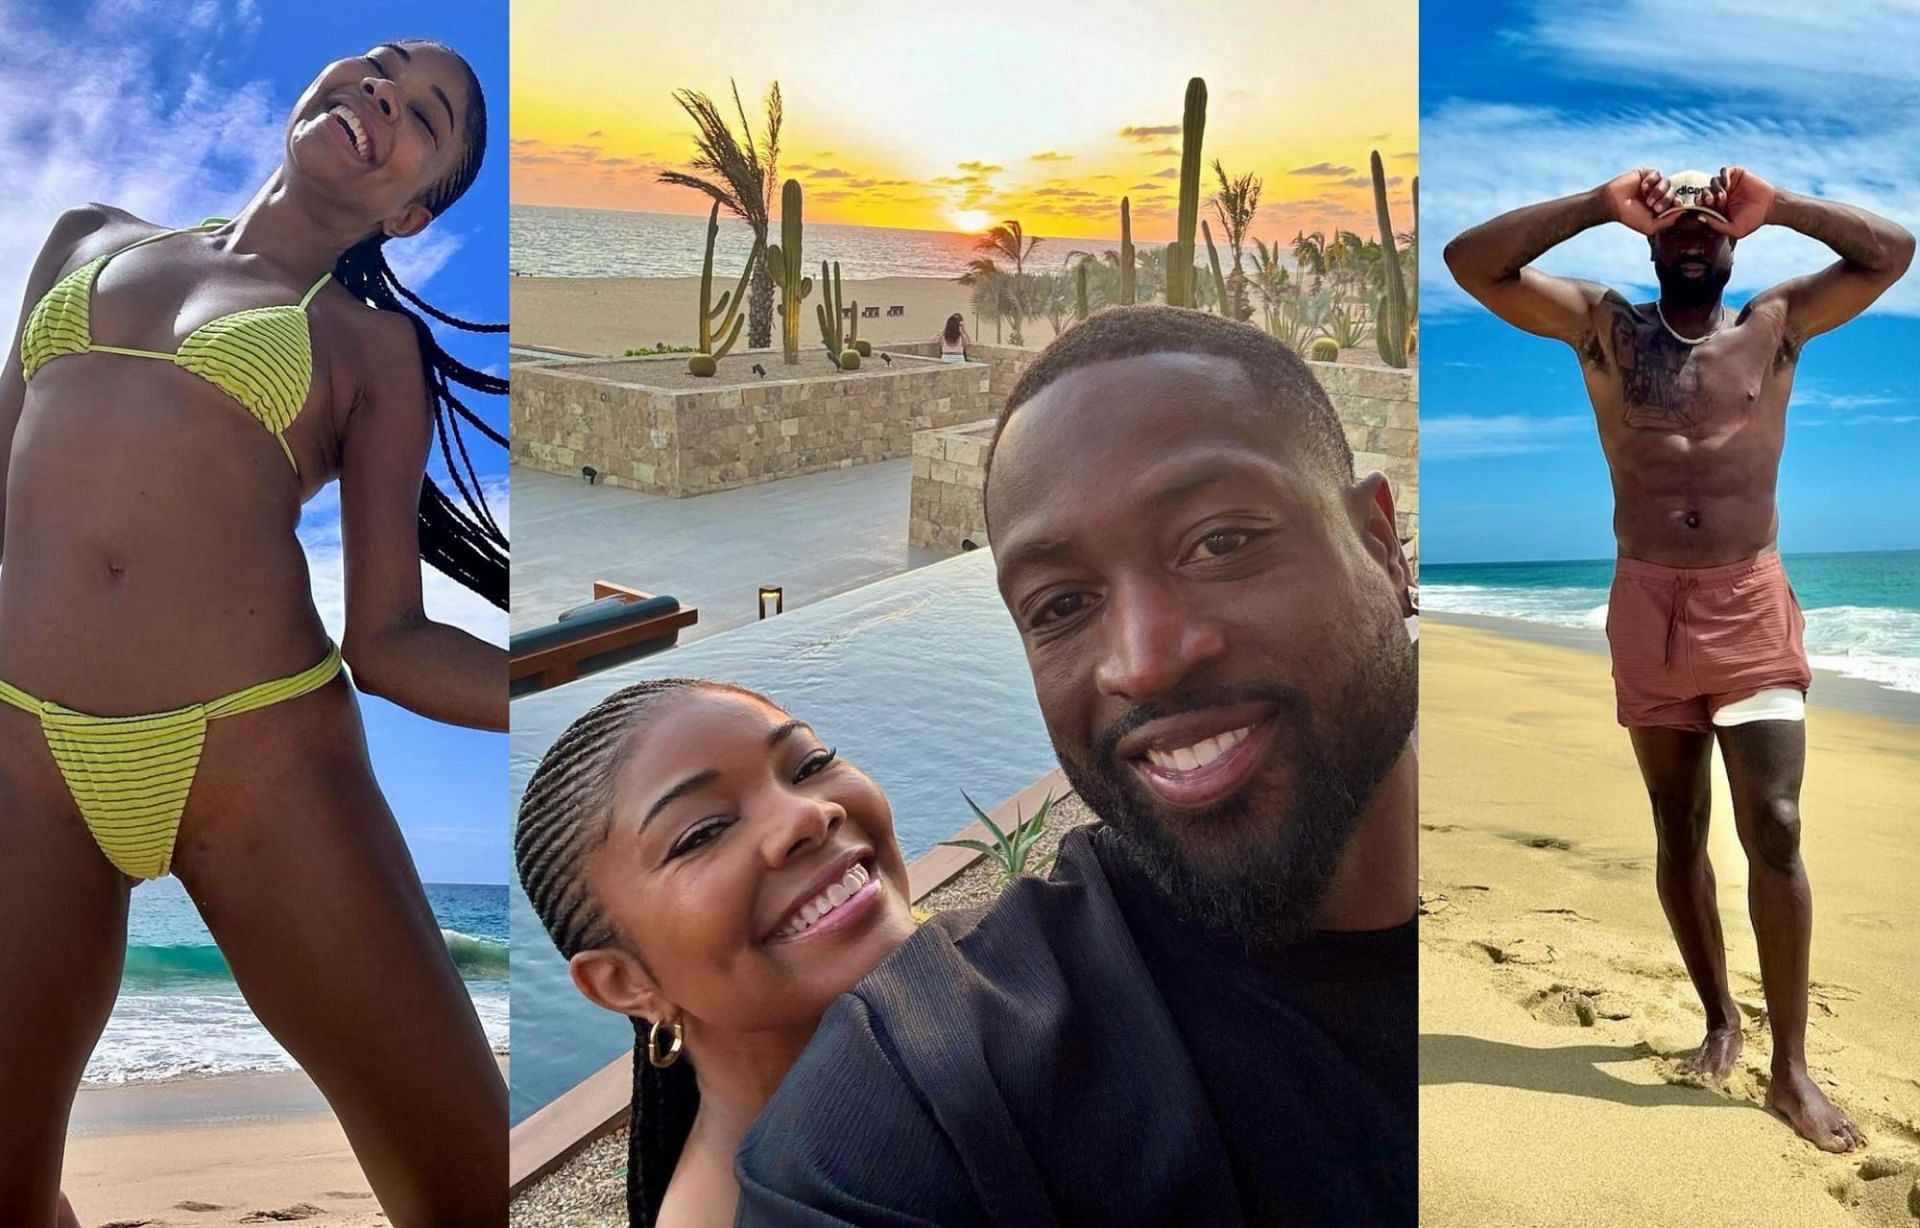 Dwyane Wade gets to spend quality time with his wife, Gabrielle Union, at the Nobu Hotel